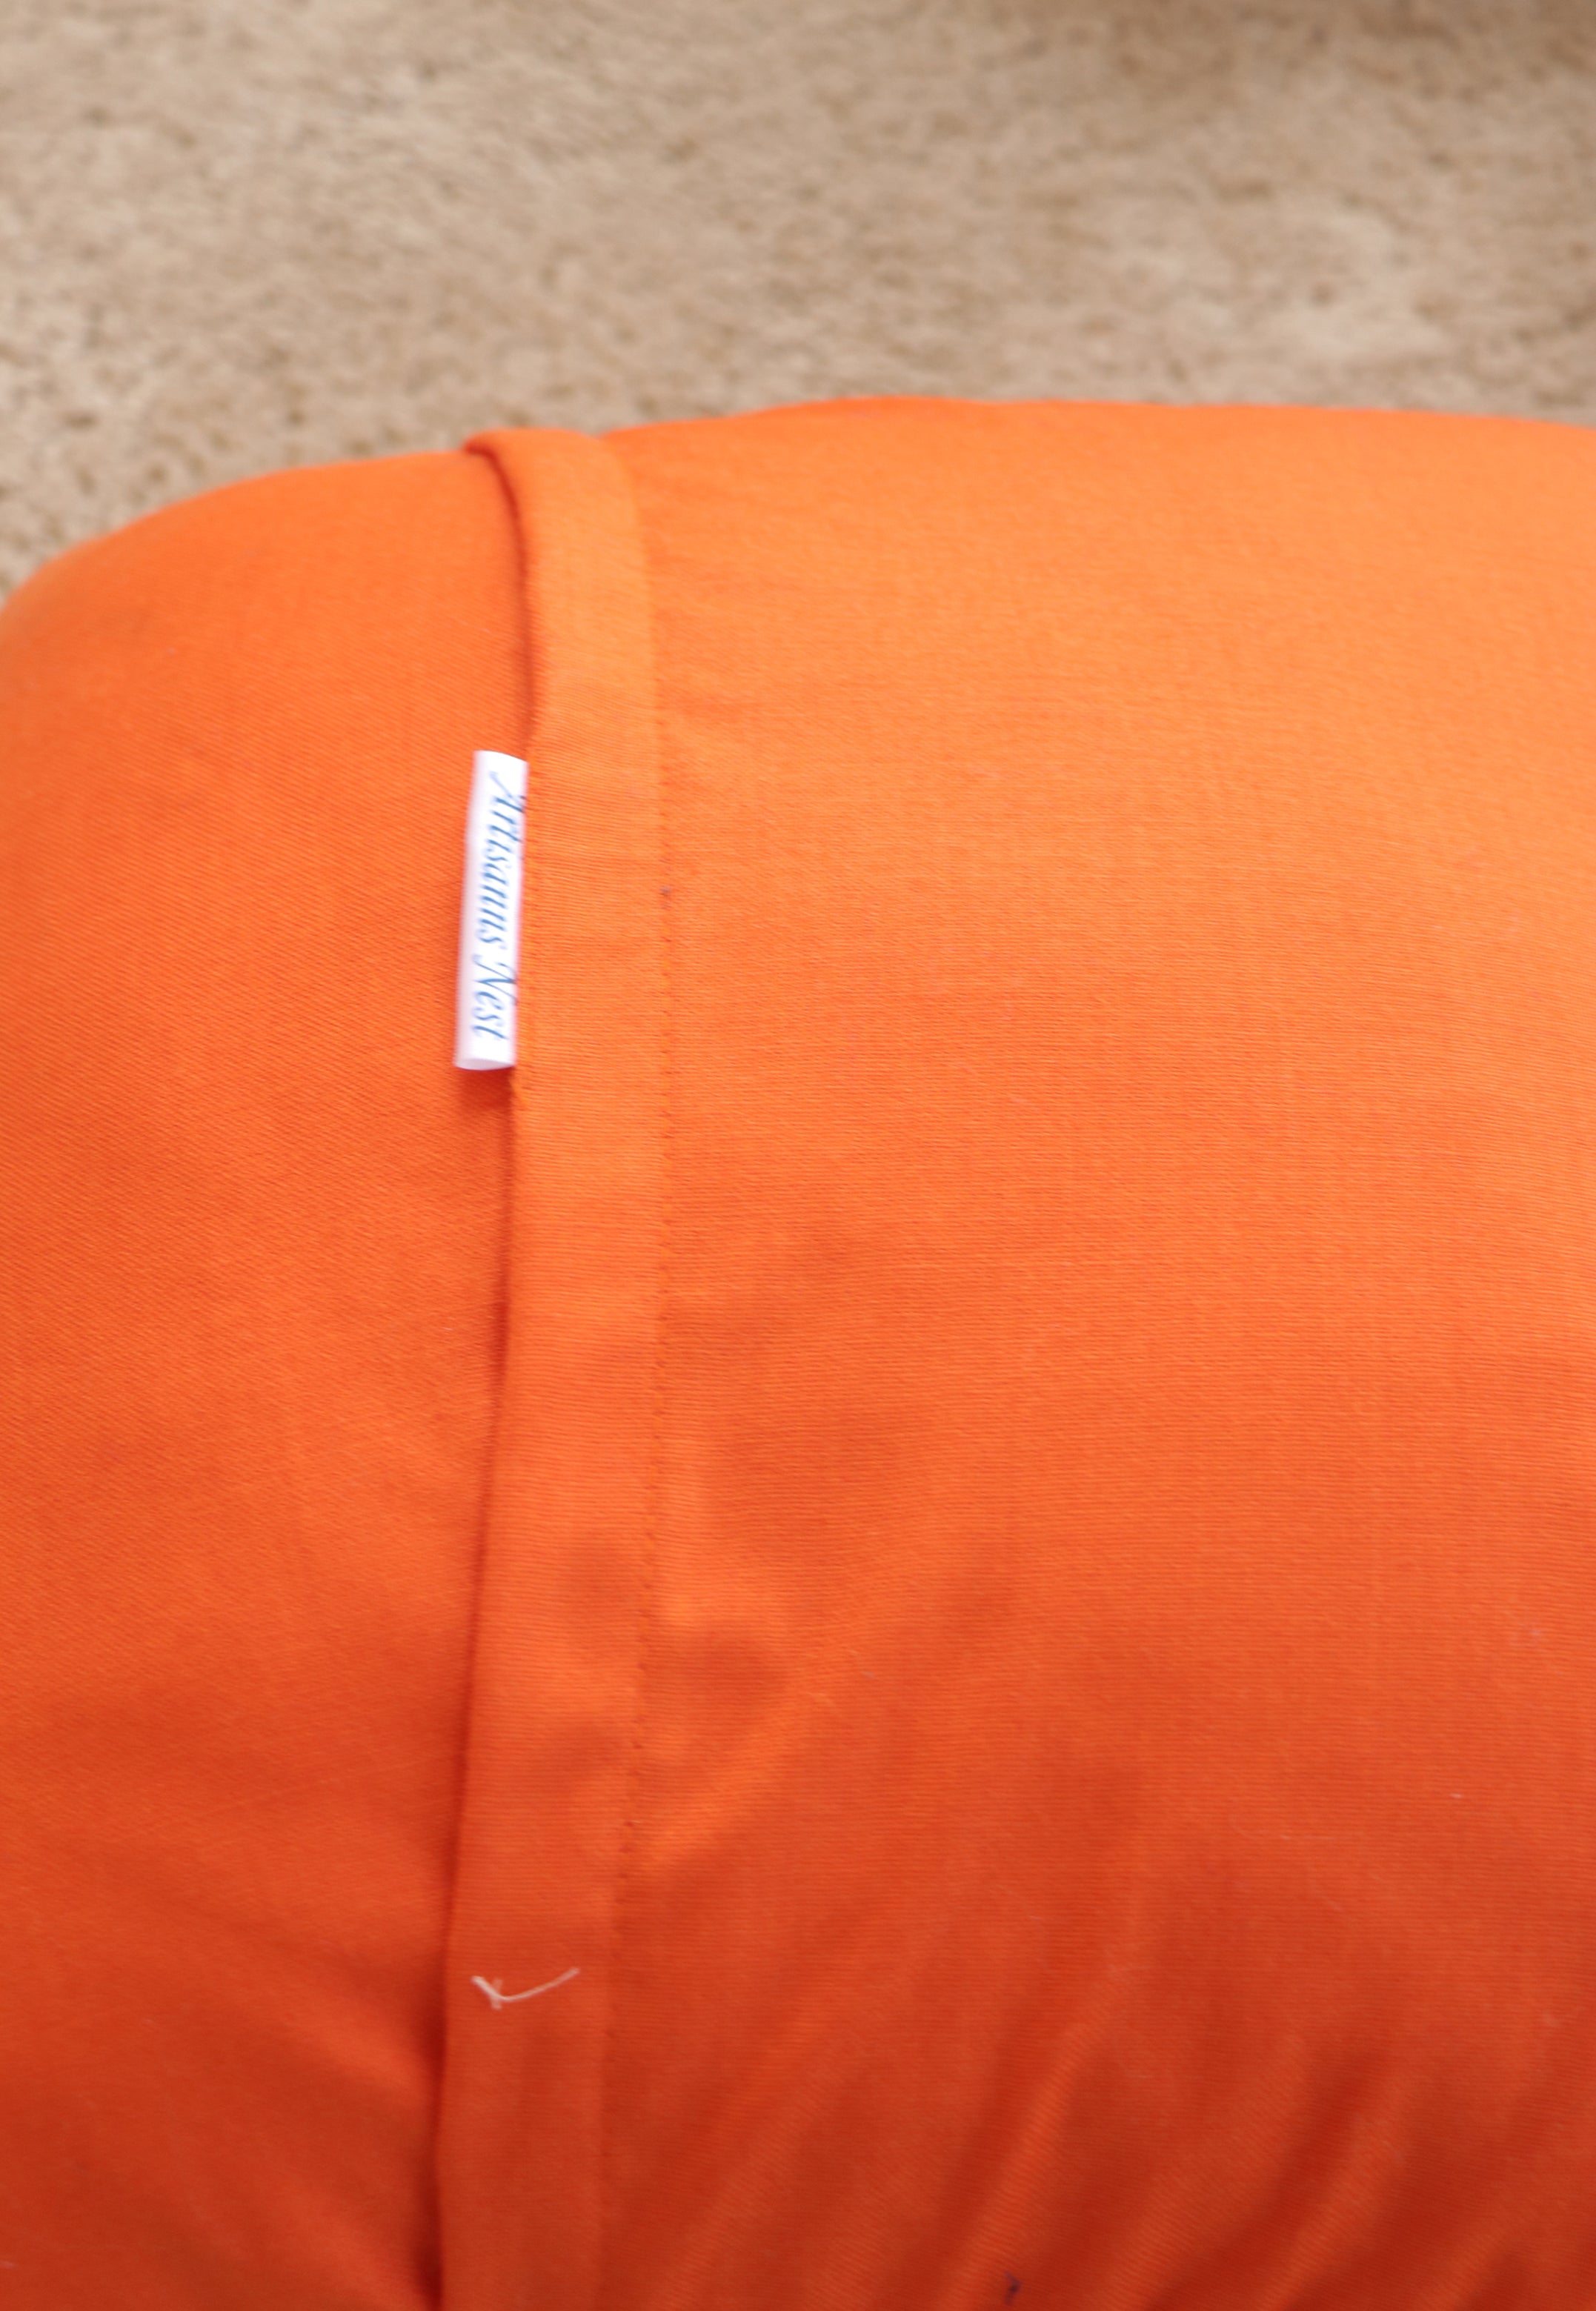 Orange hand knitted cushions with cots-wool backing by artisans of India for winter season